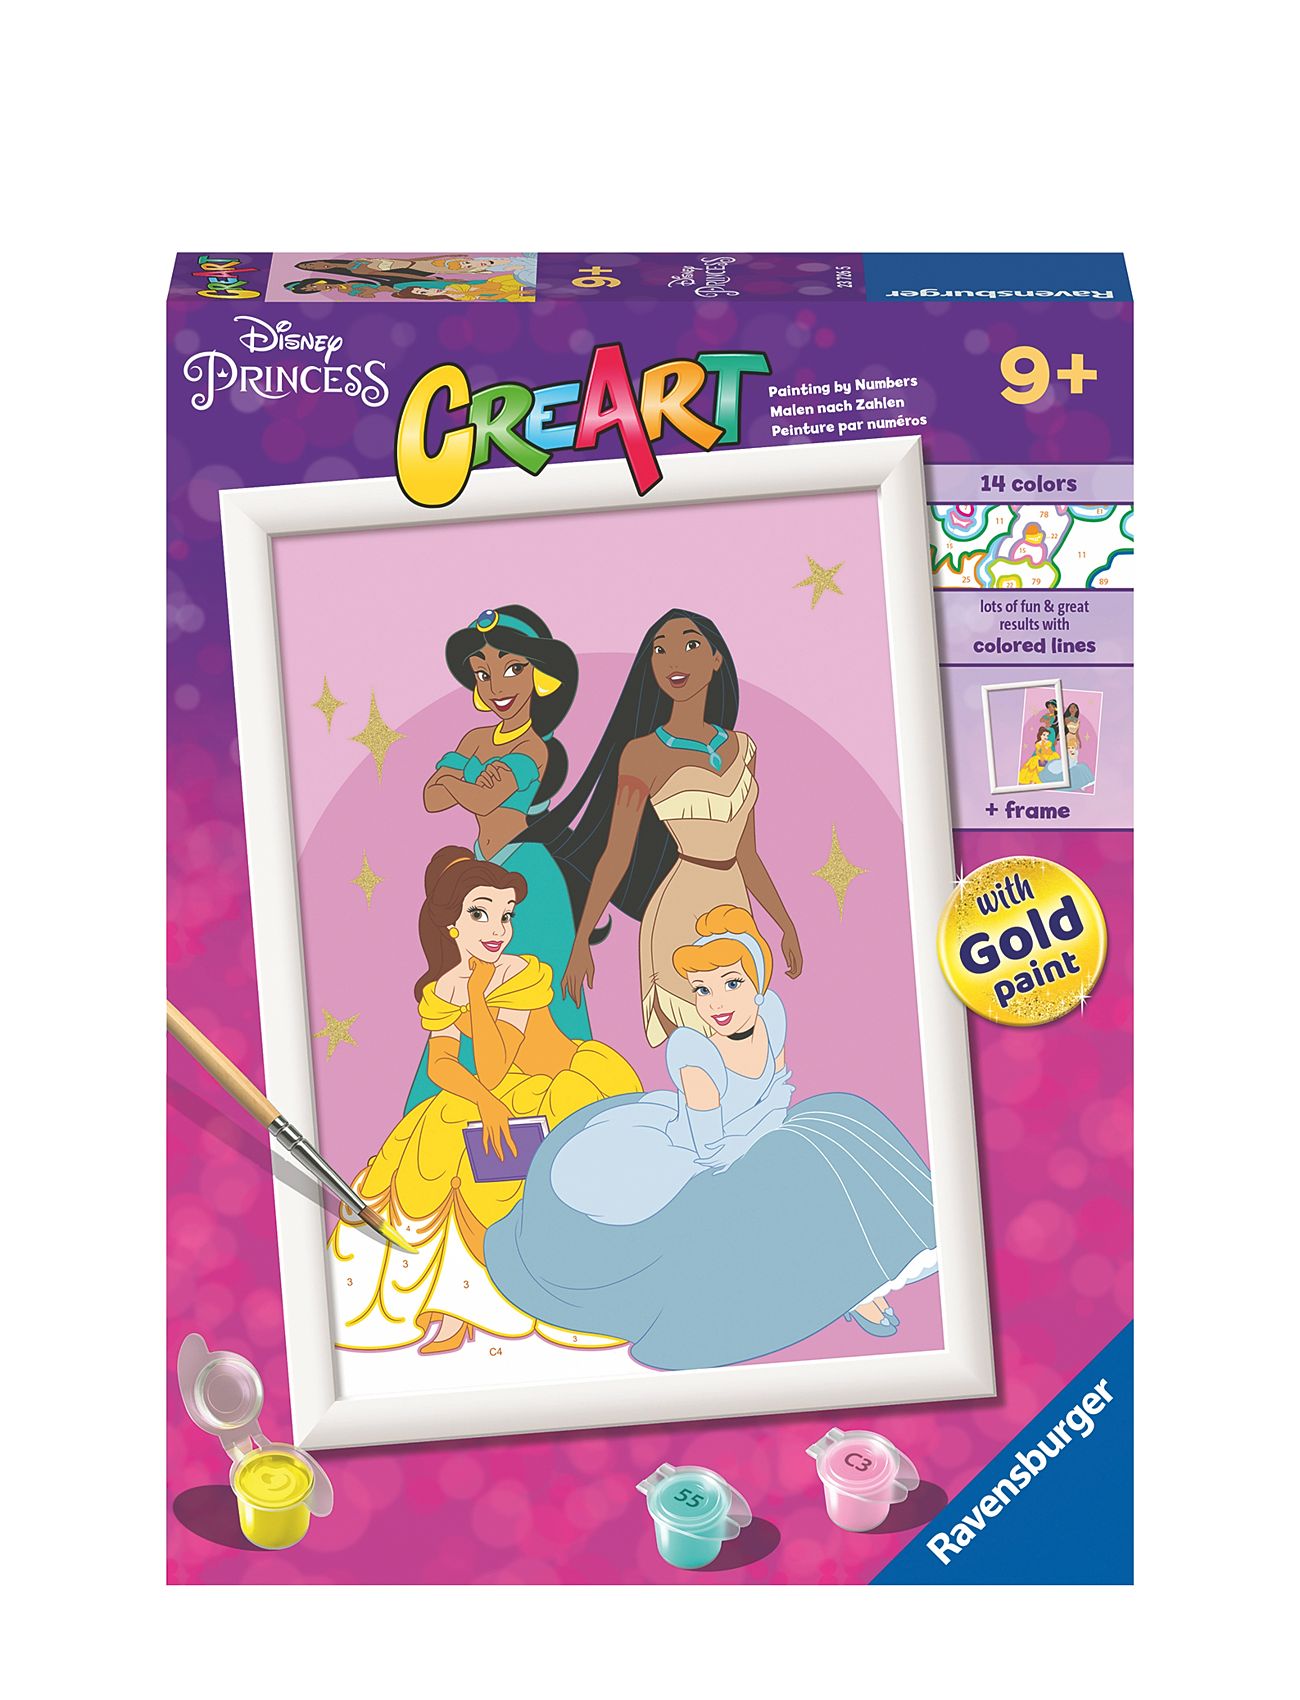 Creart Disney Princess Toys Puzzles And Games Puzzles Classic Puzzles Multi/patterned Ravensburger